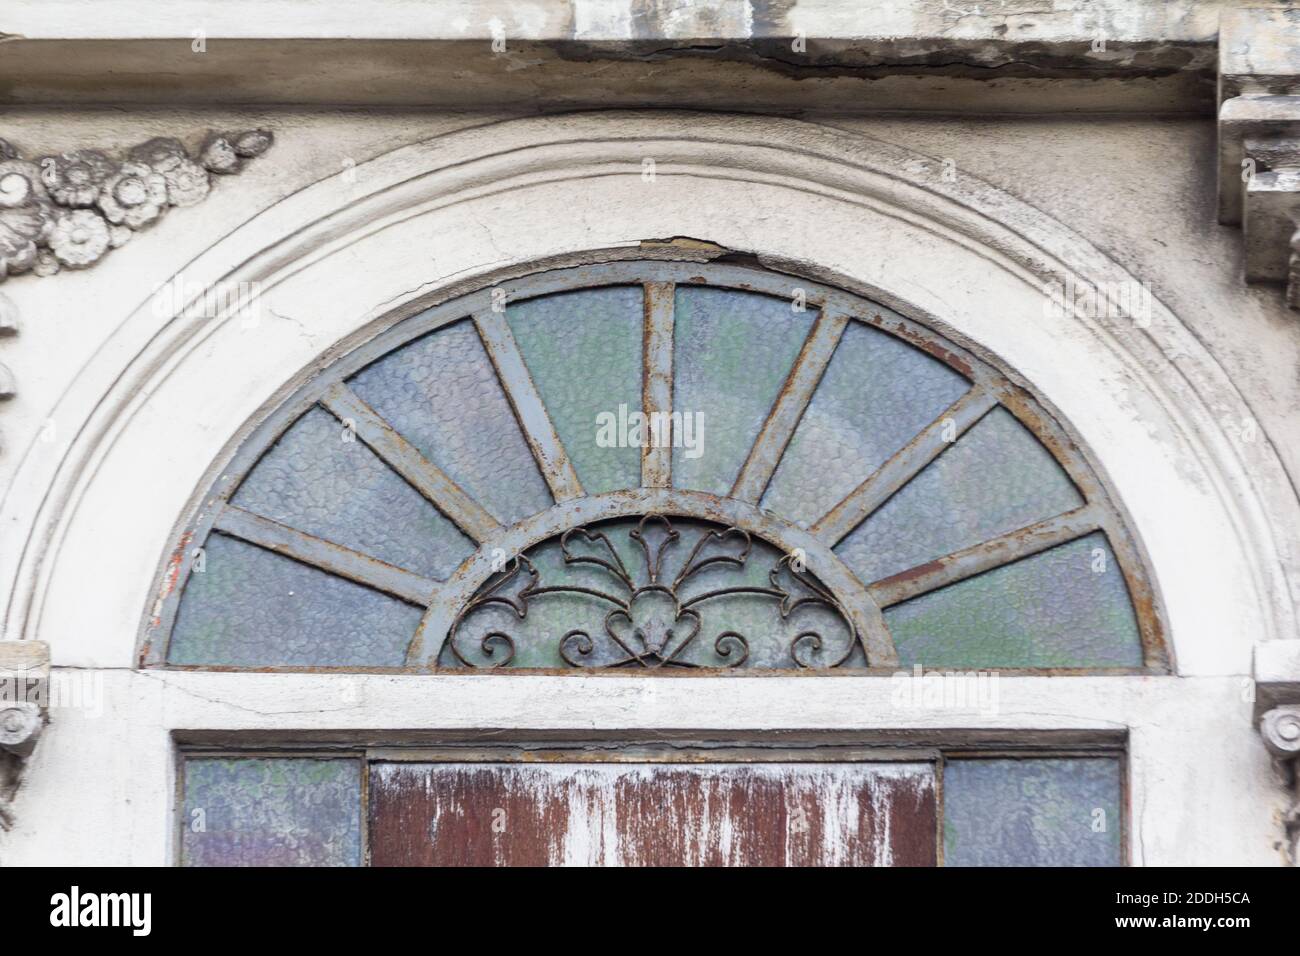 Architectural detail of the El Hogar building in Manila, Philippines Stock Photo